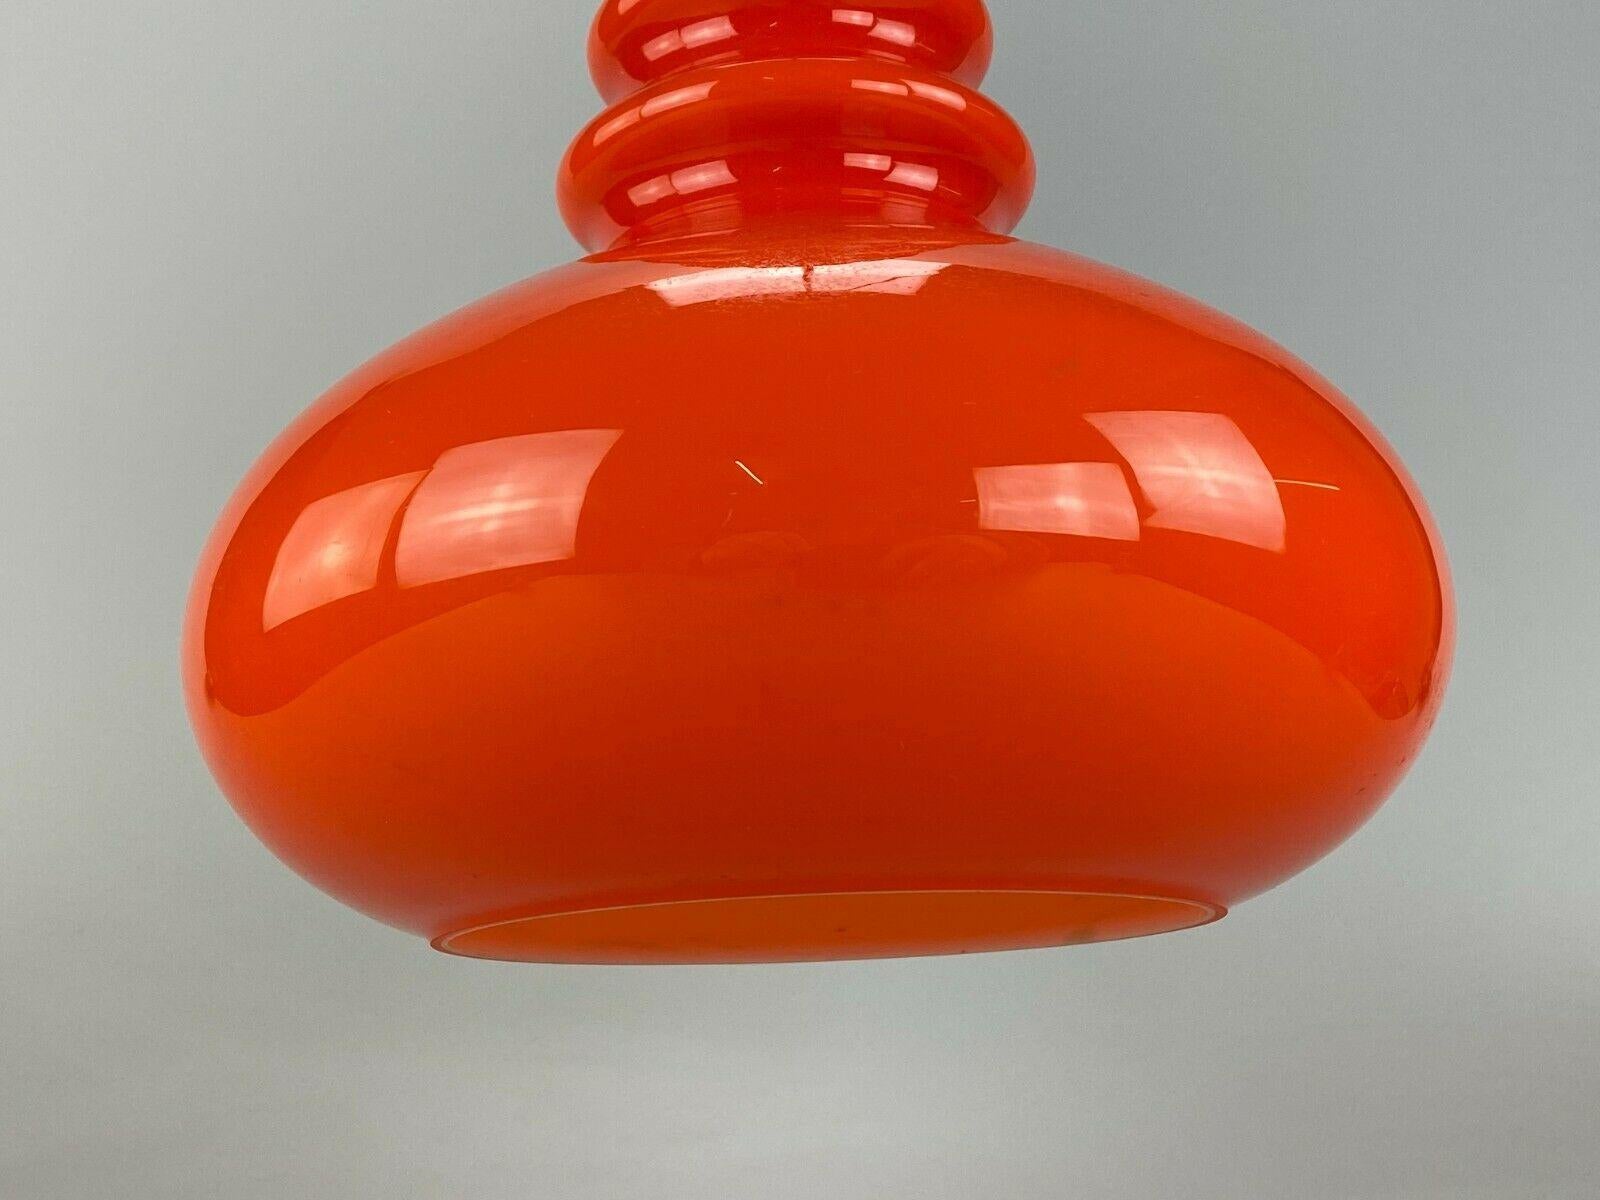 Late 20th Century 60s 70s Peill & Putzler Hanging Lamp Ceiling Lamp Glass Space Design Lamp